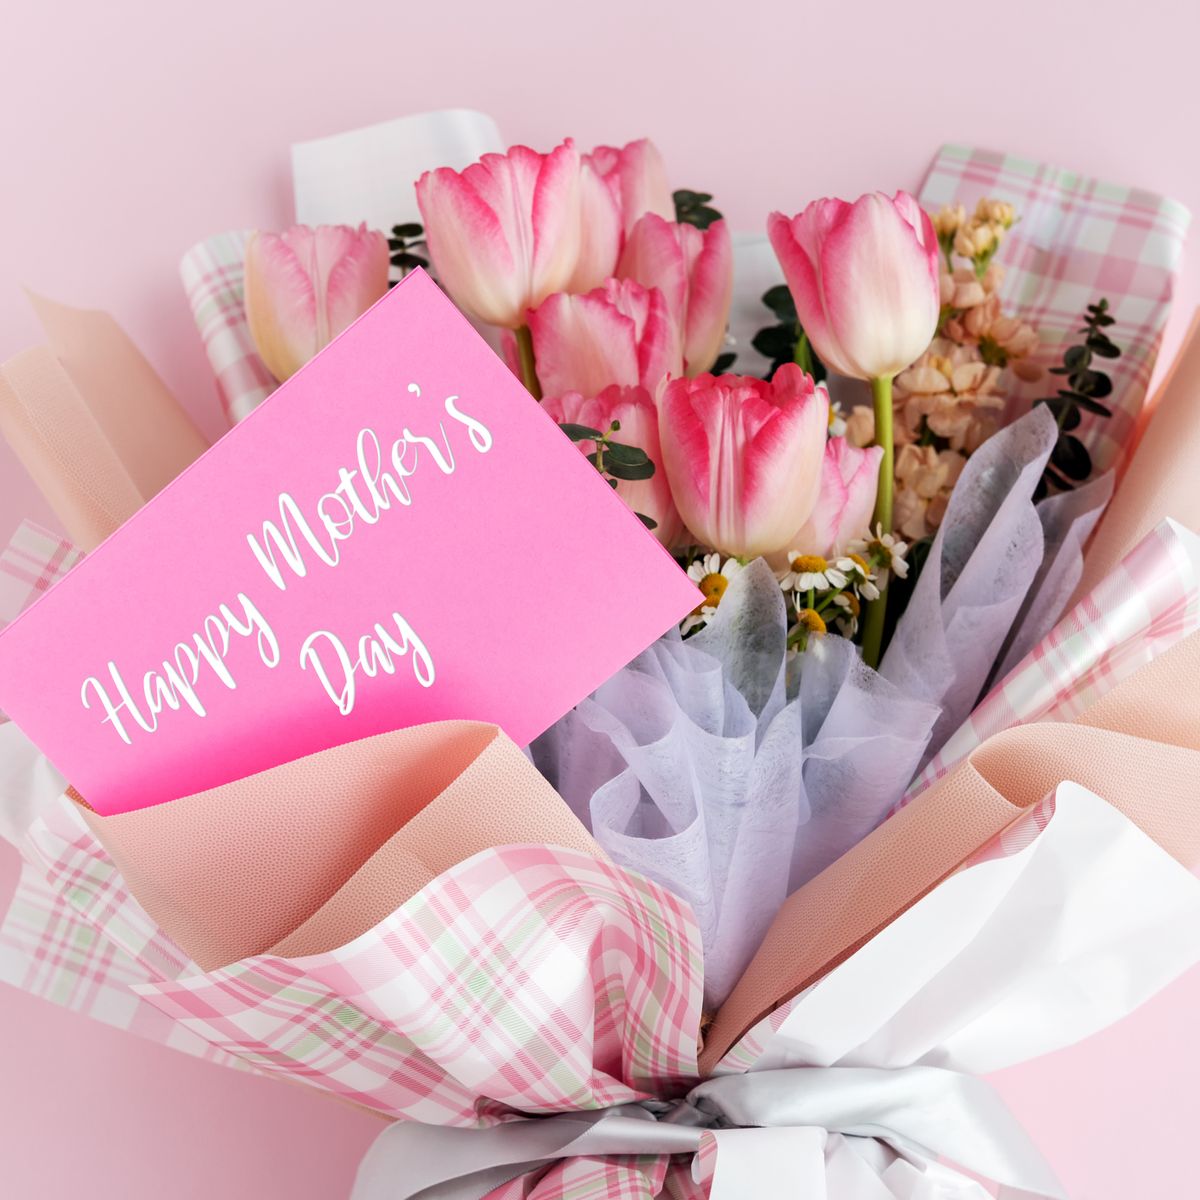 https://hips.hearstapps.com/hmg-prod/images/mother-s-day-messages-tulip-bouquet-642f15beb2596.jpg?crop=0.668xw:1.00xh;0.121xw,0&resize=1200:*